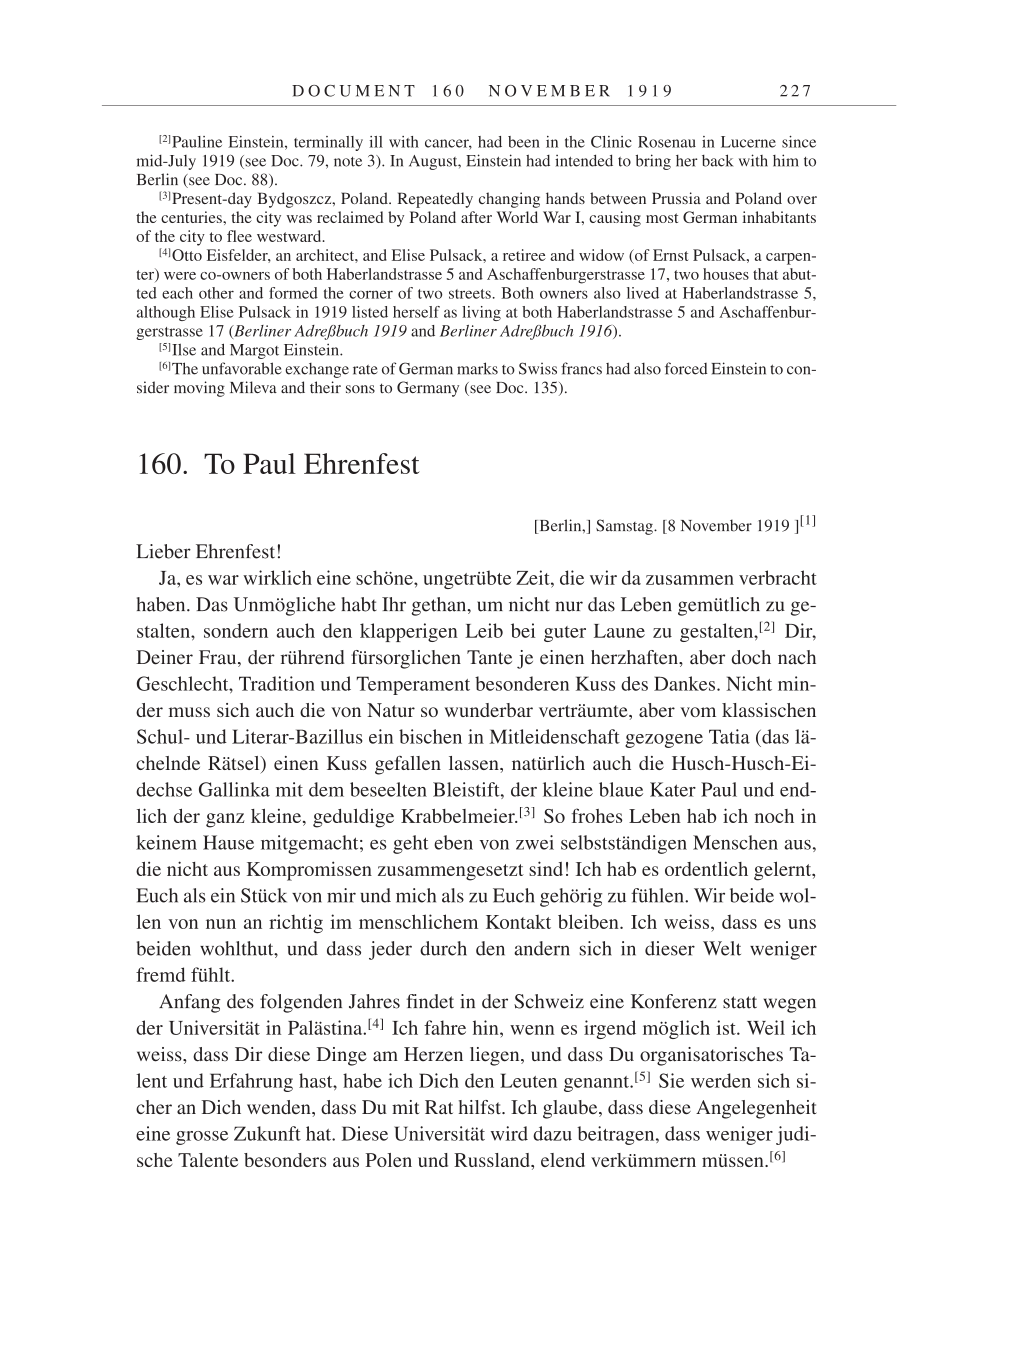 Volume 9: The Berlin Years: Correspondence January 1919-April 1920 page 227